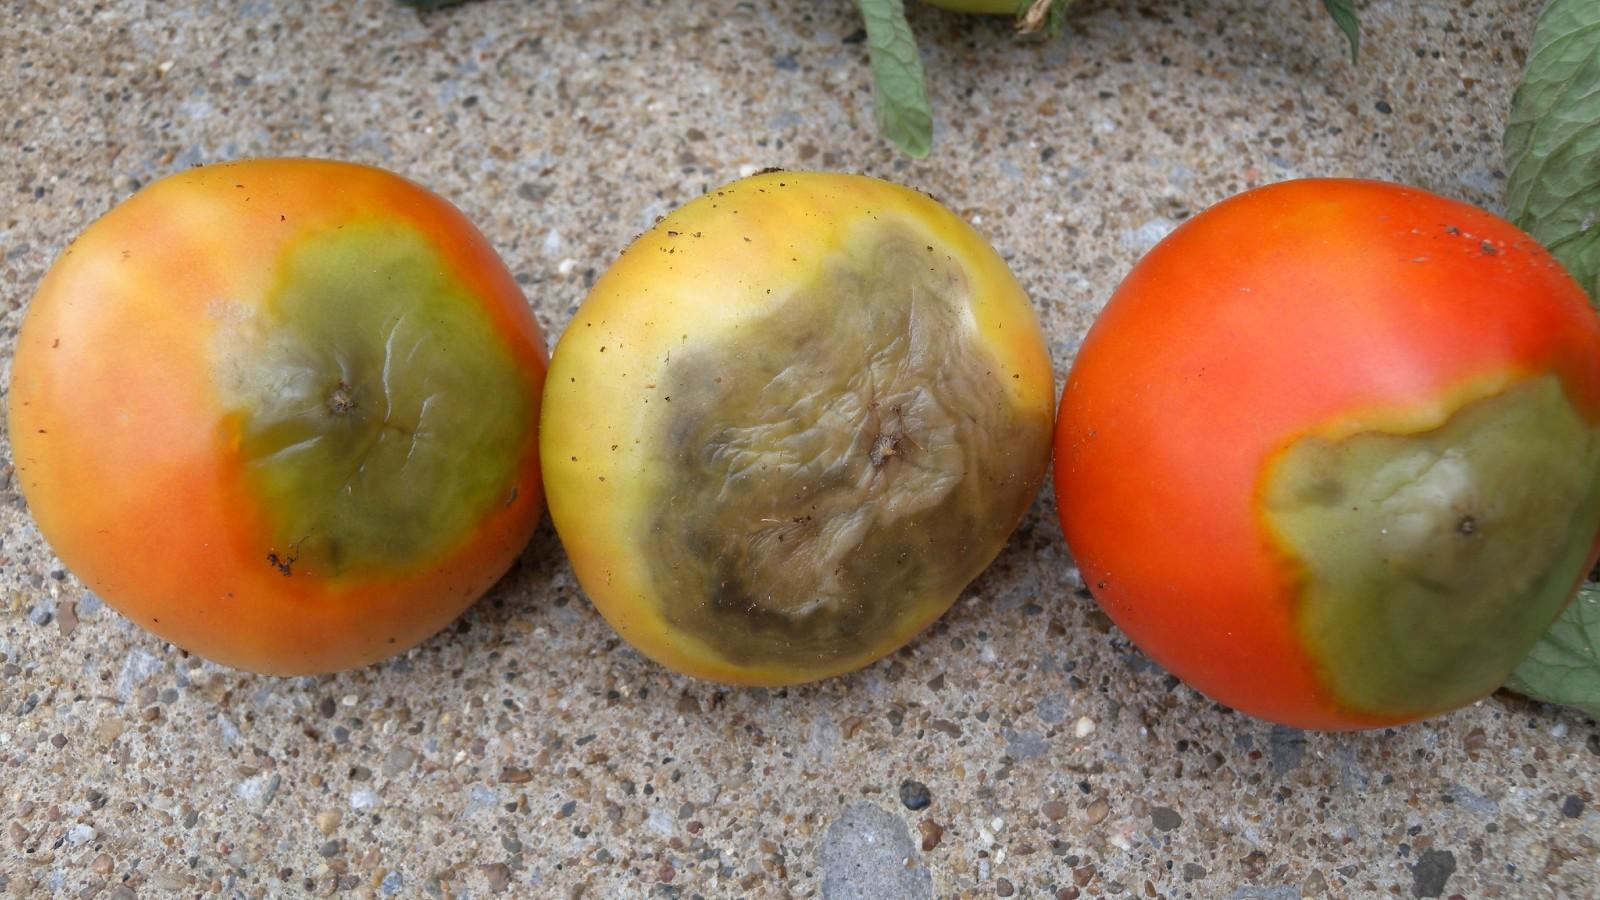 rotting of the bottom end of tomatoes